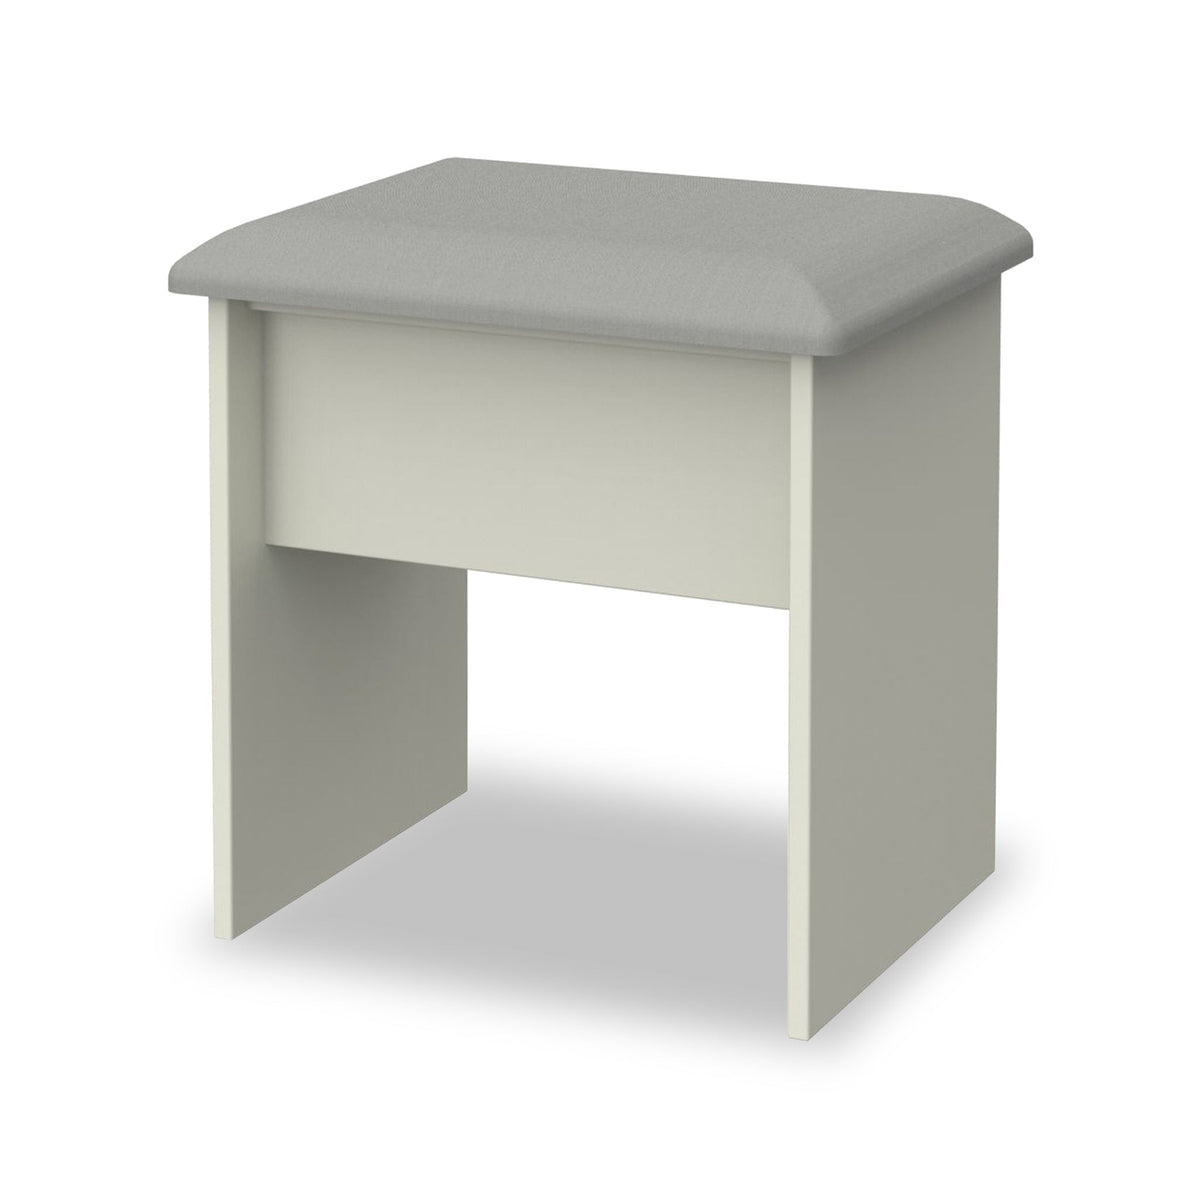 Beckett Cream Gloss Dressing Table with Stool from Roseland